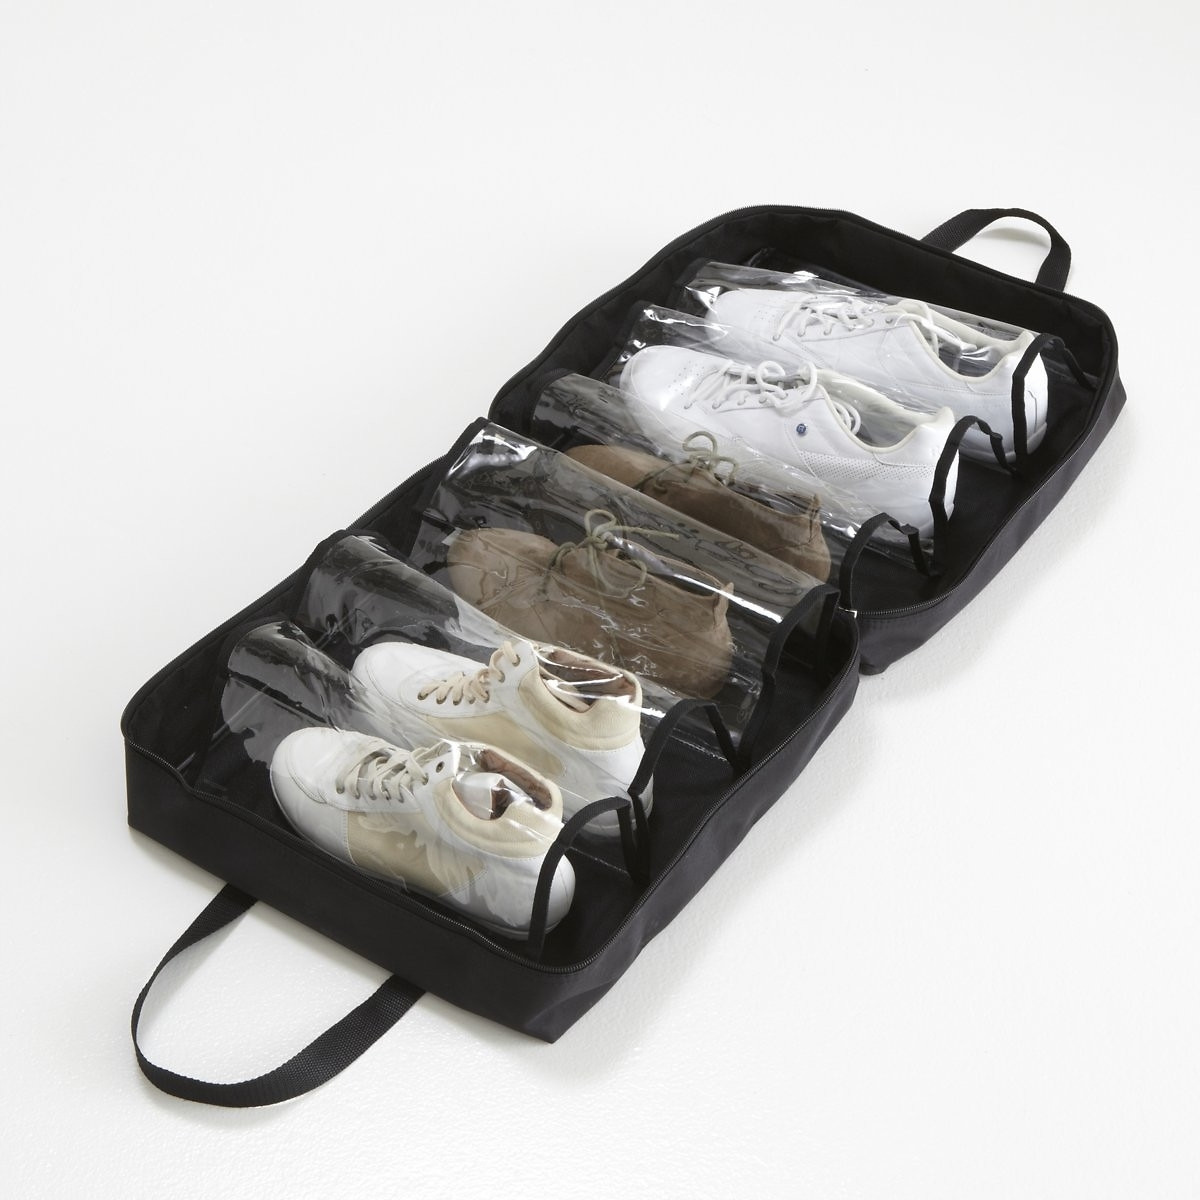 Shoe Storage for 6 Pairs - image 1